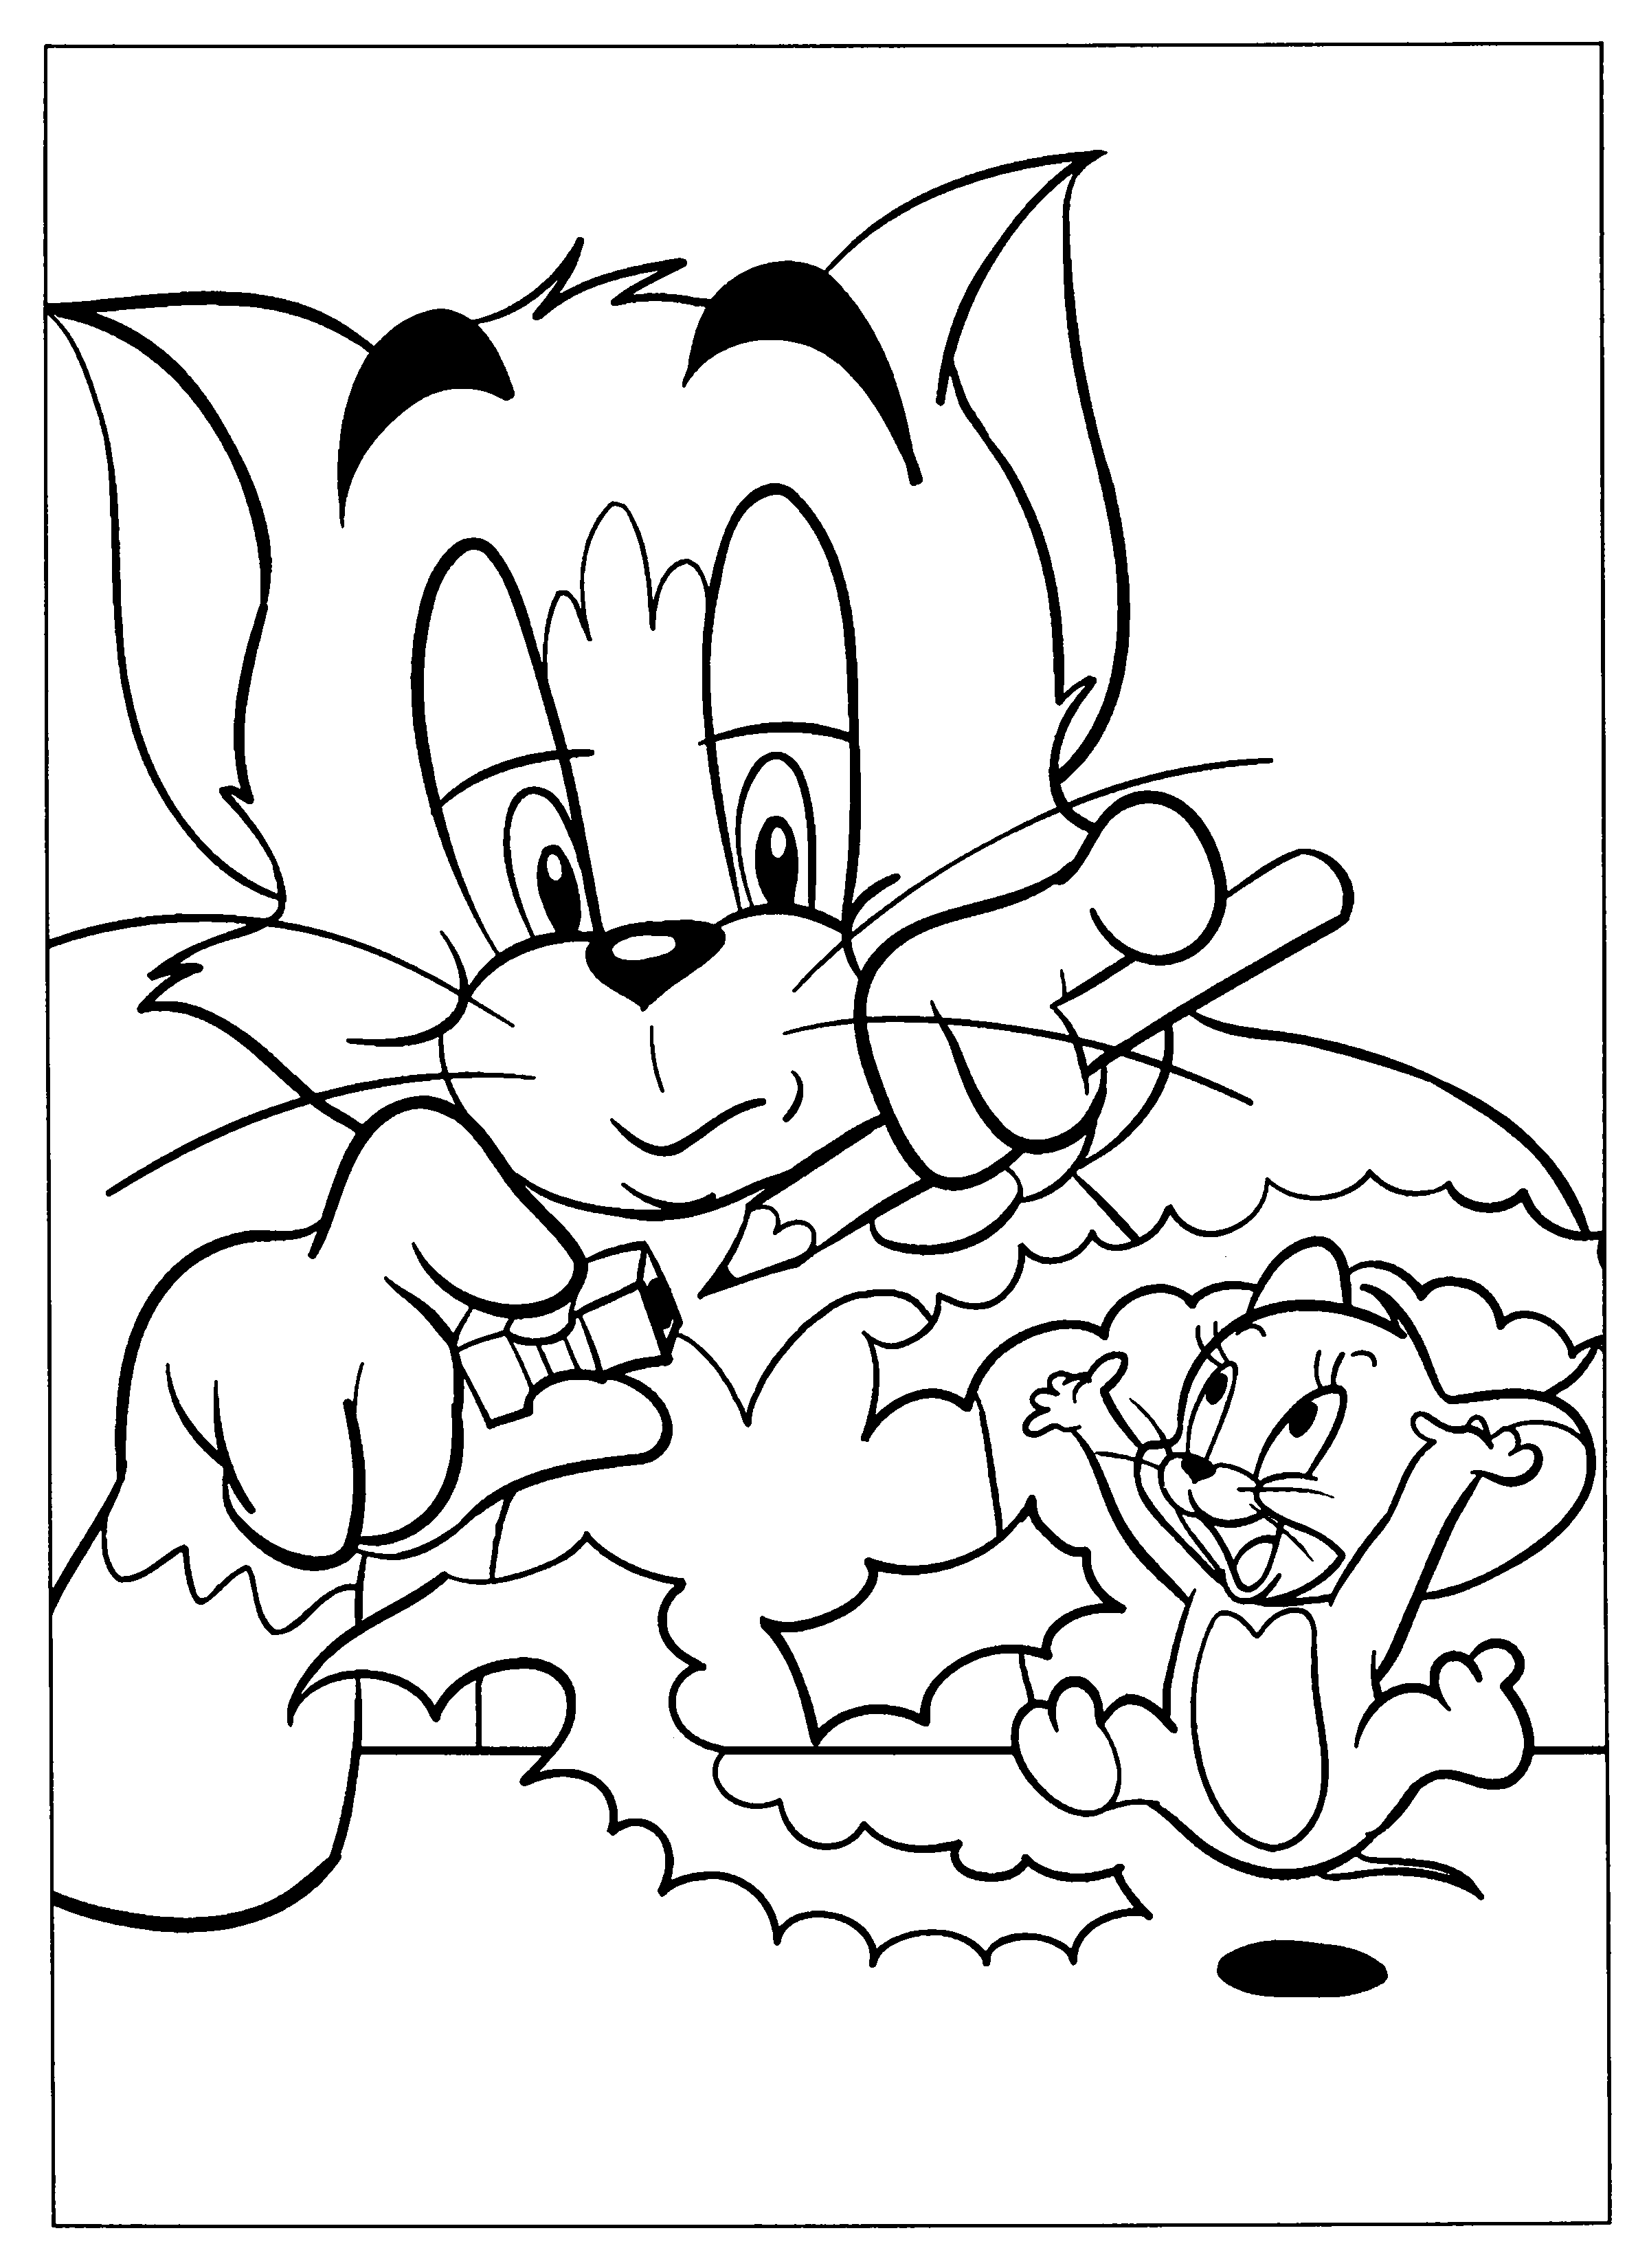 Coloring Page   Tom And Jerry Coloring Pages 20   Coloring Home